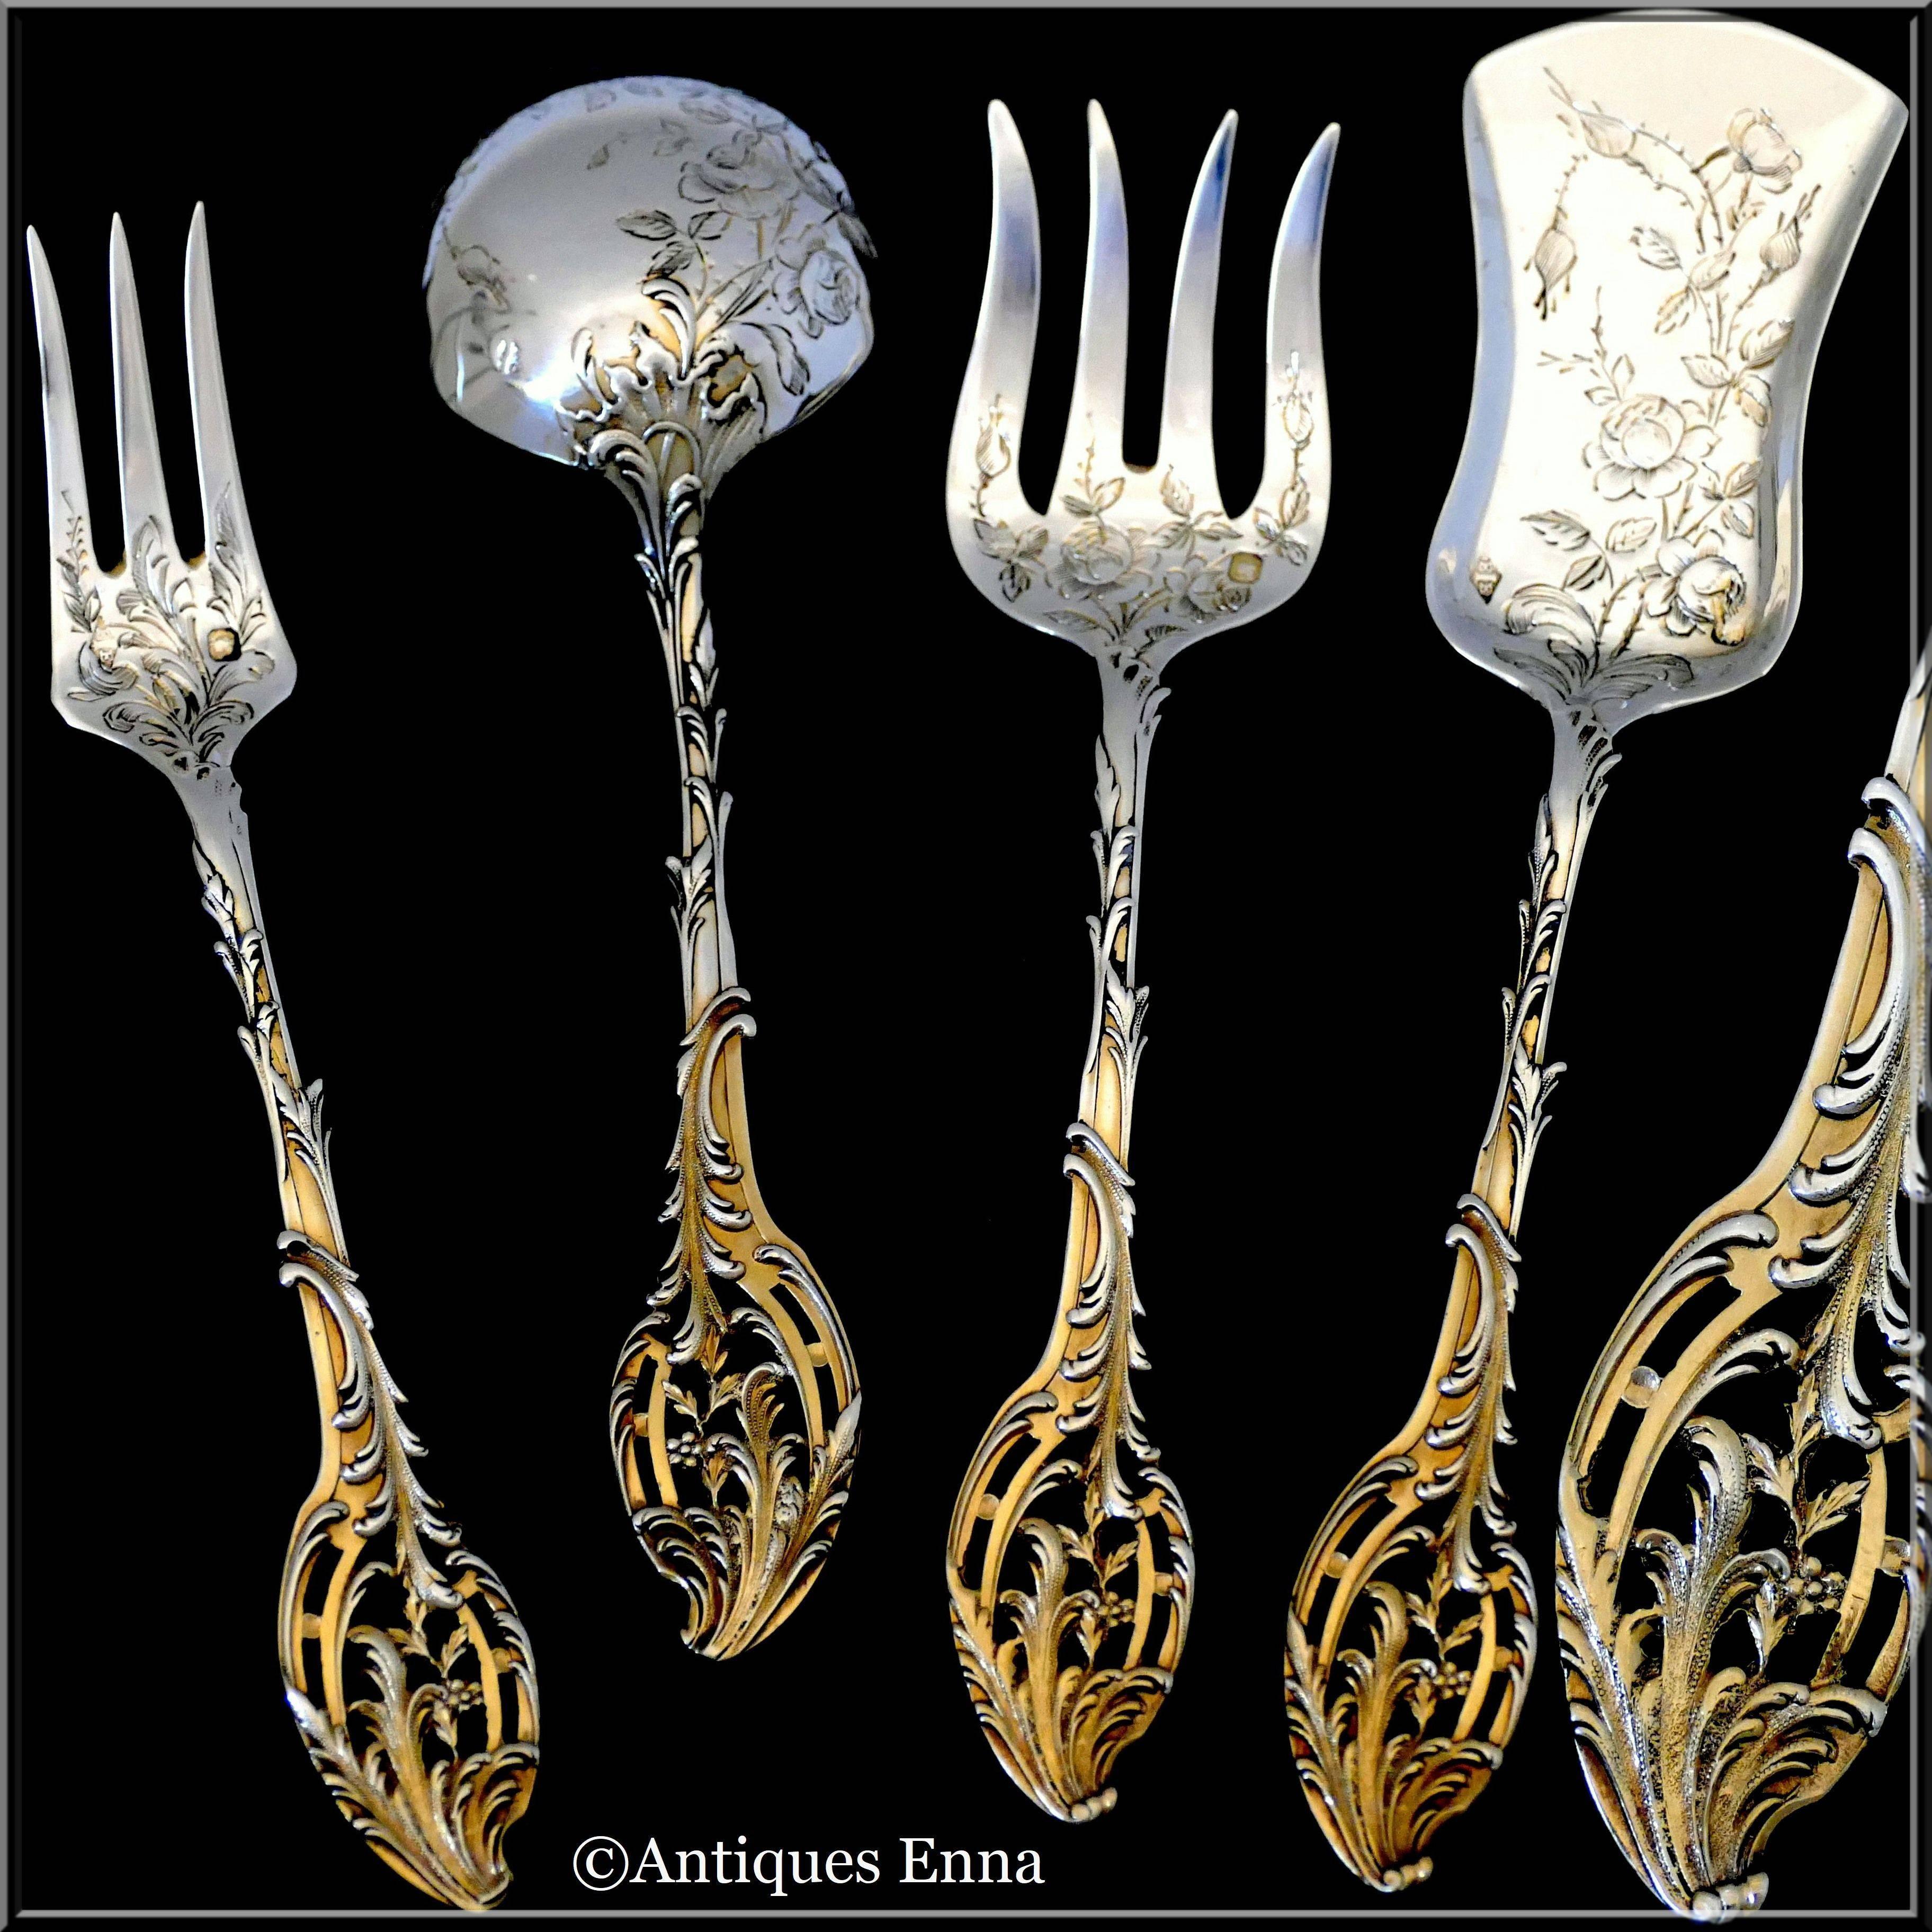 An exceptional set from the point of view of its design but also for the multicolored which is itself quite rare as well as the contrast between the details gilded with 18-carat gold and the background. The handles are pierced and decorated with